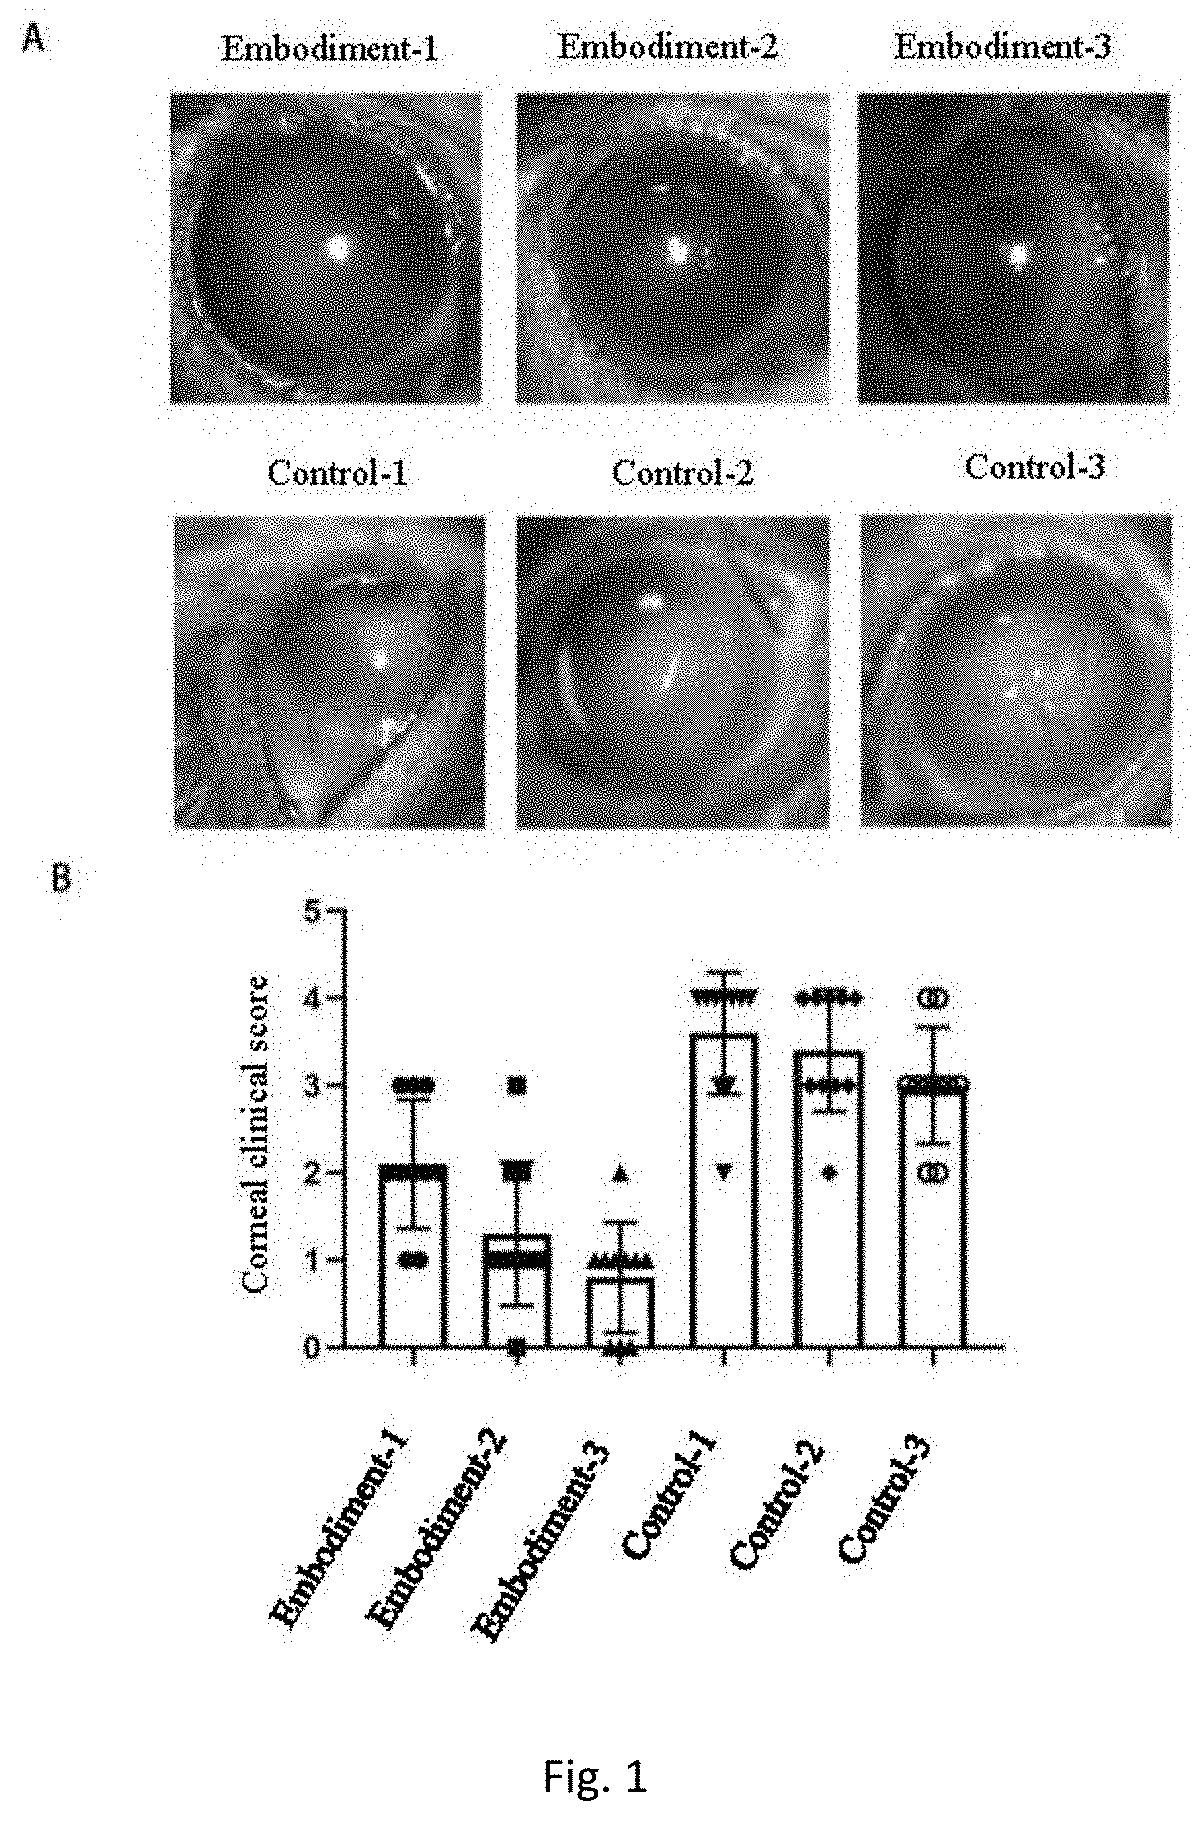 Eyedrop applicable to limbal stem cell deficiency and preparation